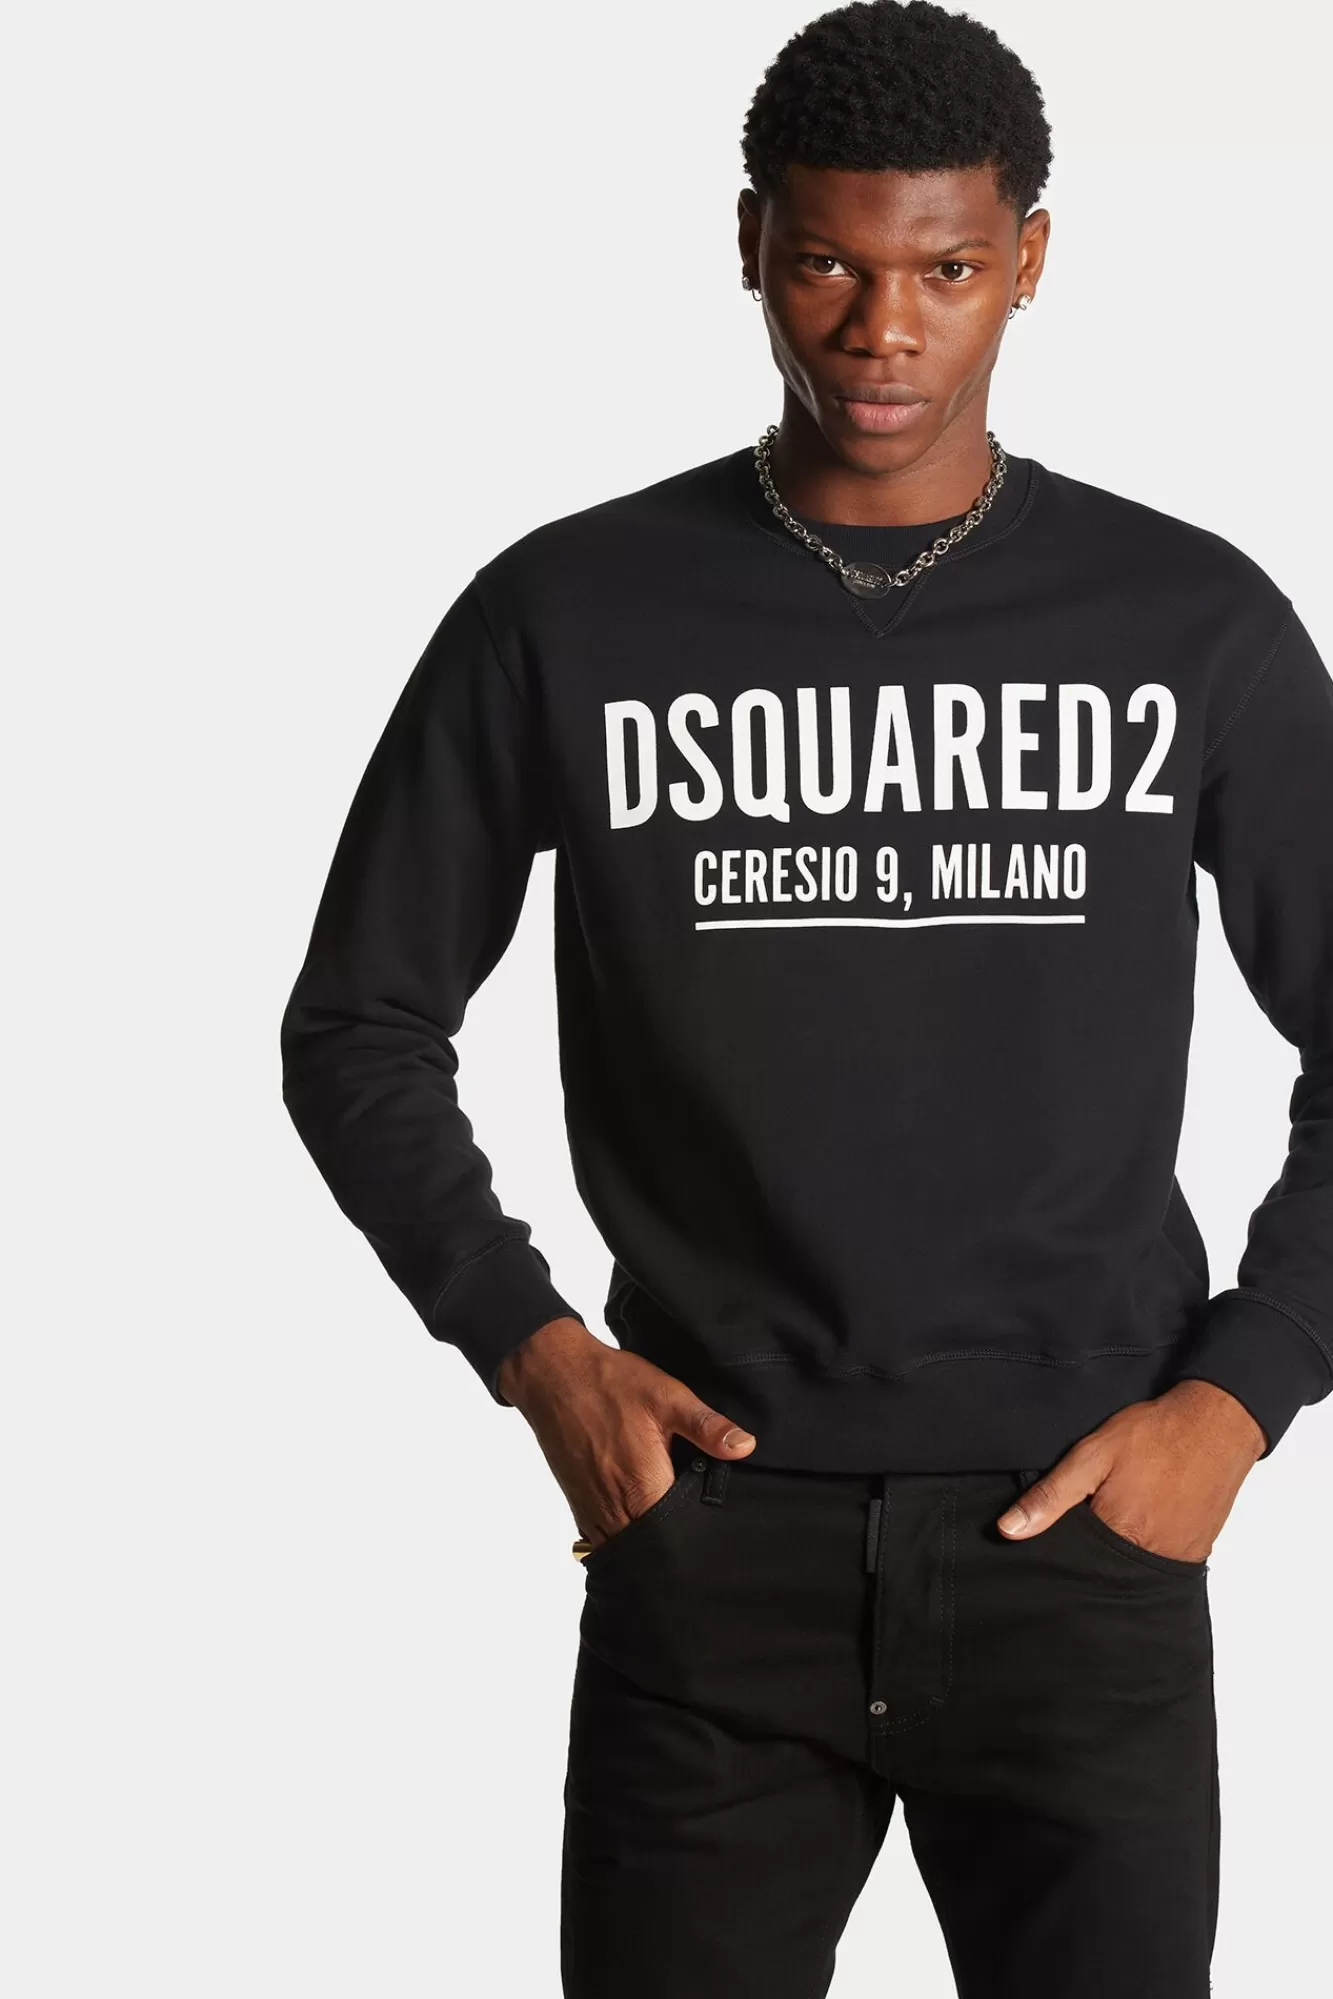 Ceresio 9 Cool Sweater<Dsquared2 Clearance